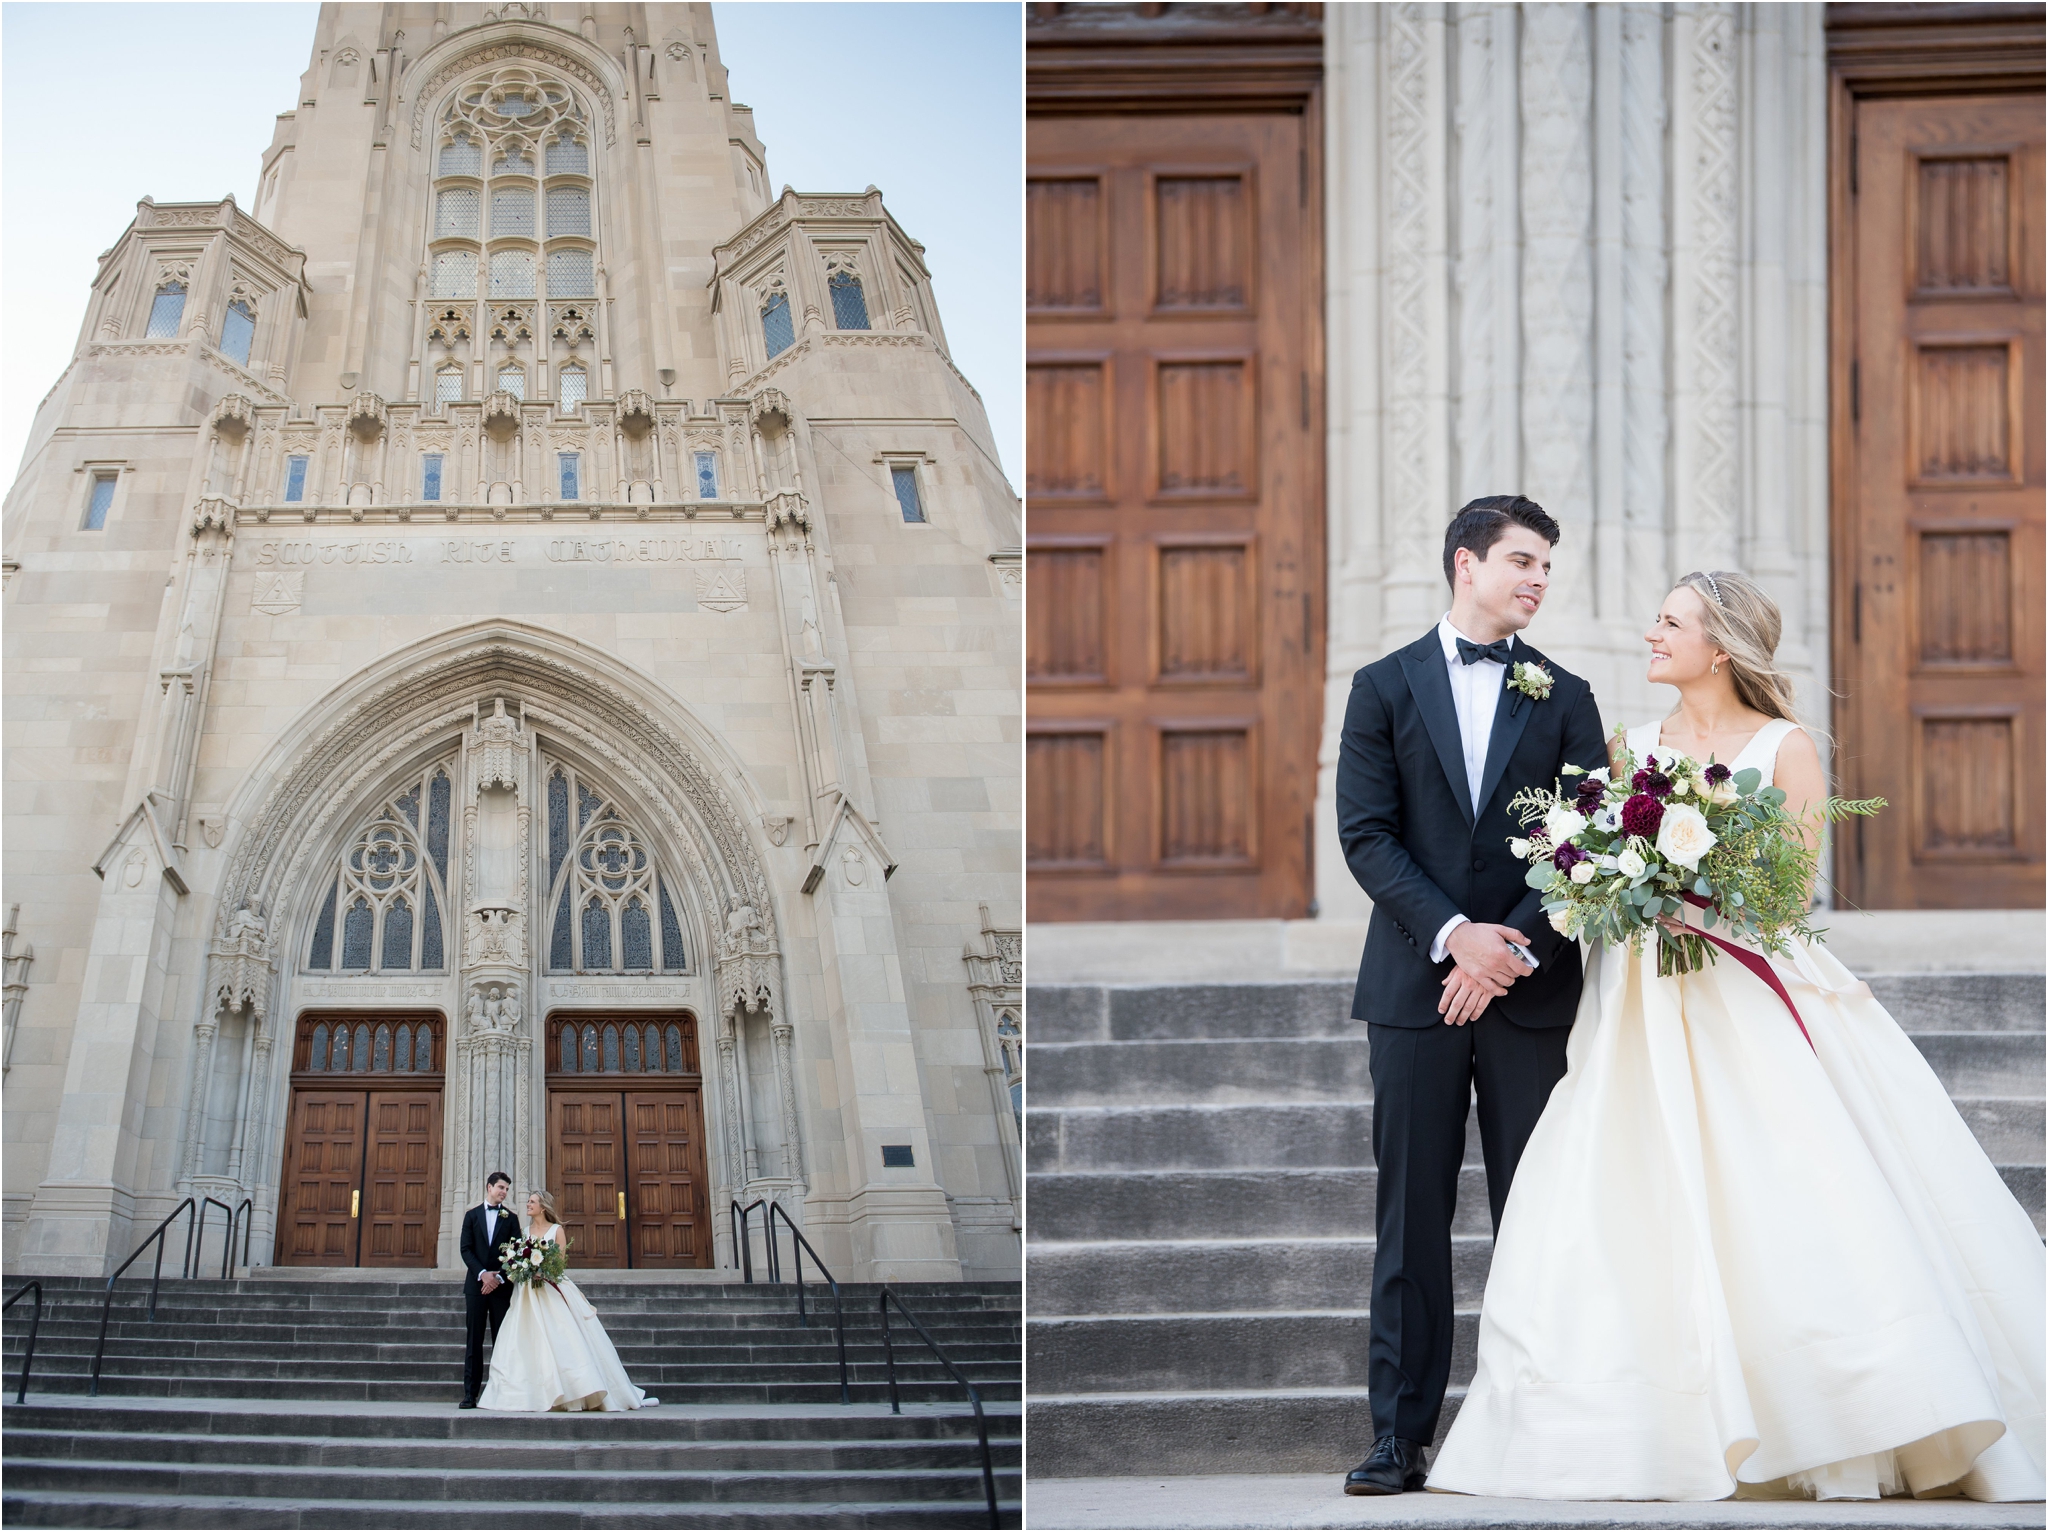 Scottish Rite Cathedral and Indianapolis Central Library wedding | Sarah & Rachel Wedding Photographers